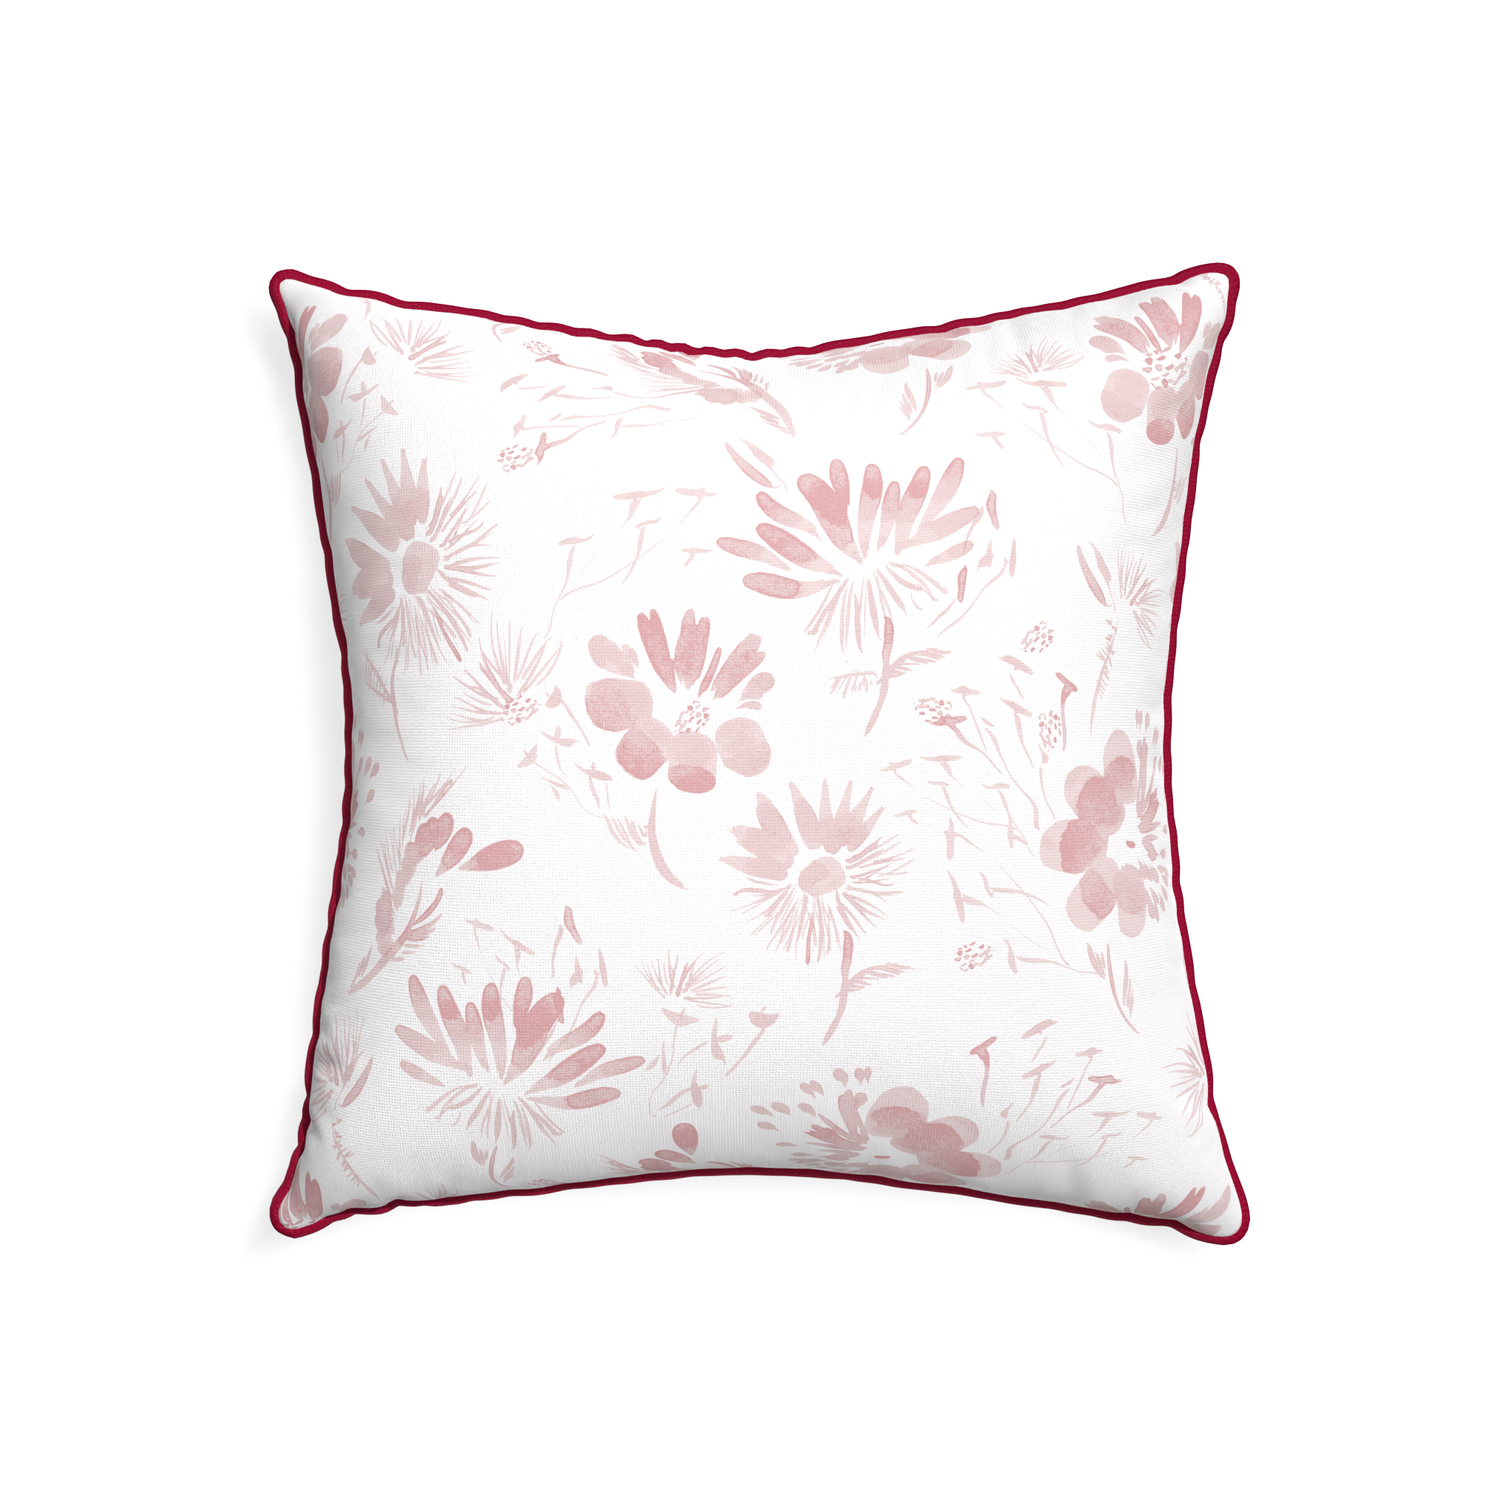 22-square blake custom pink floralpillow with raspberry piping on white background